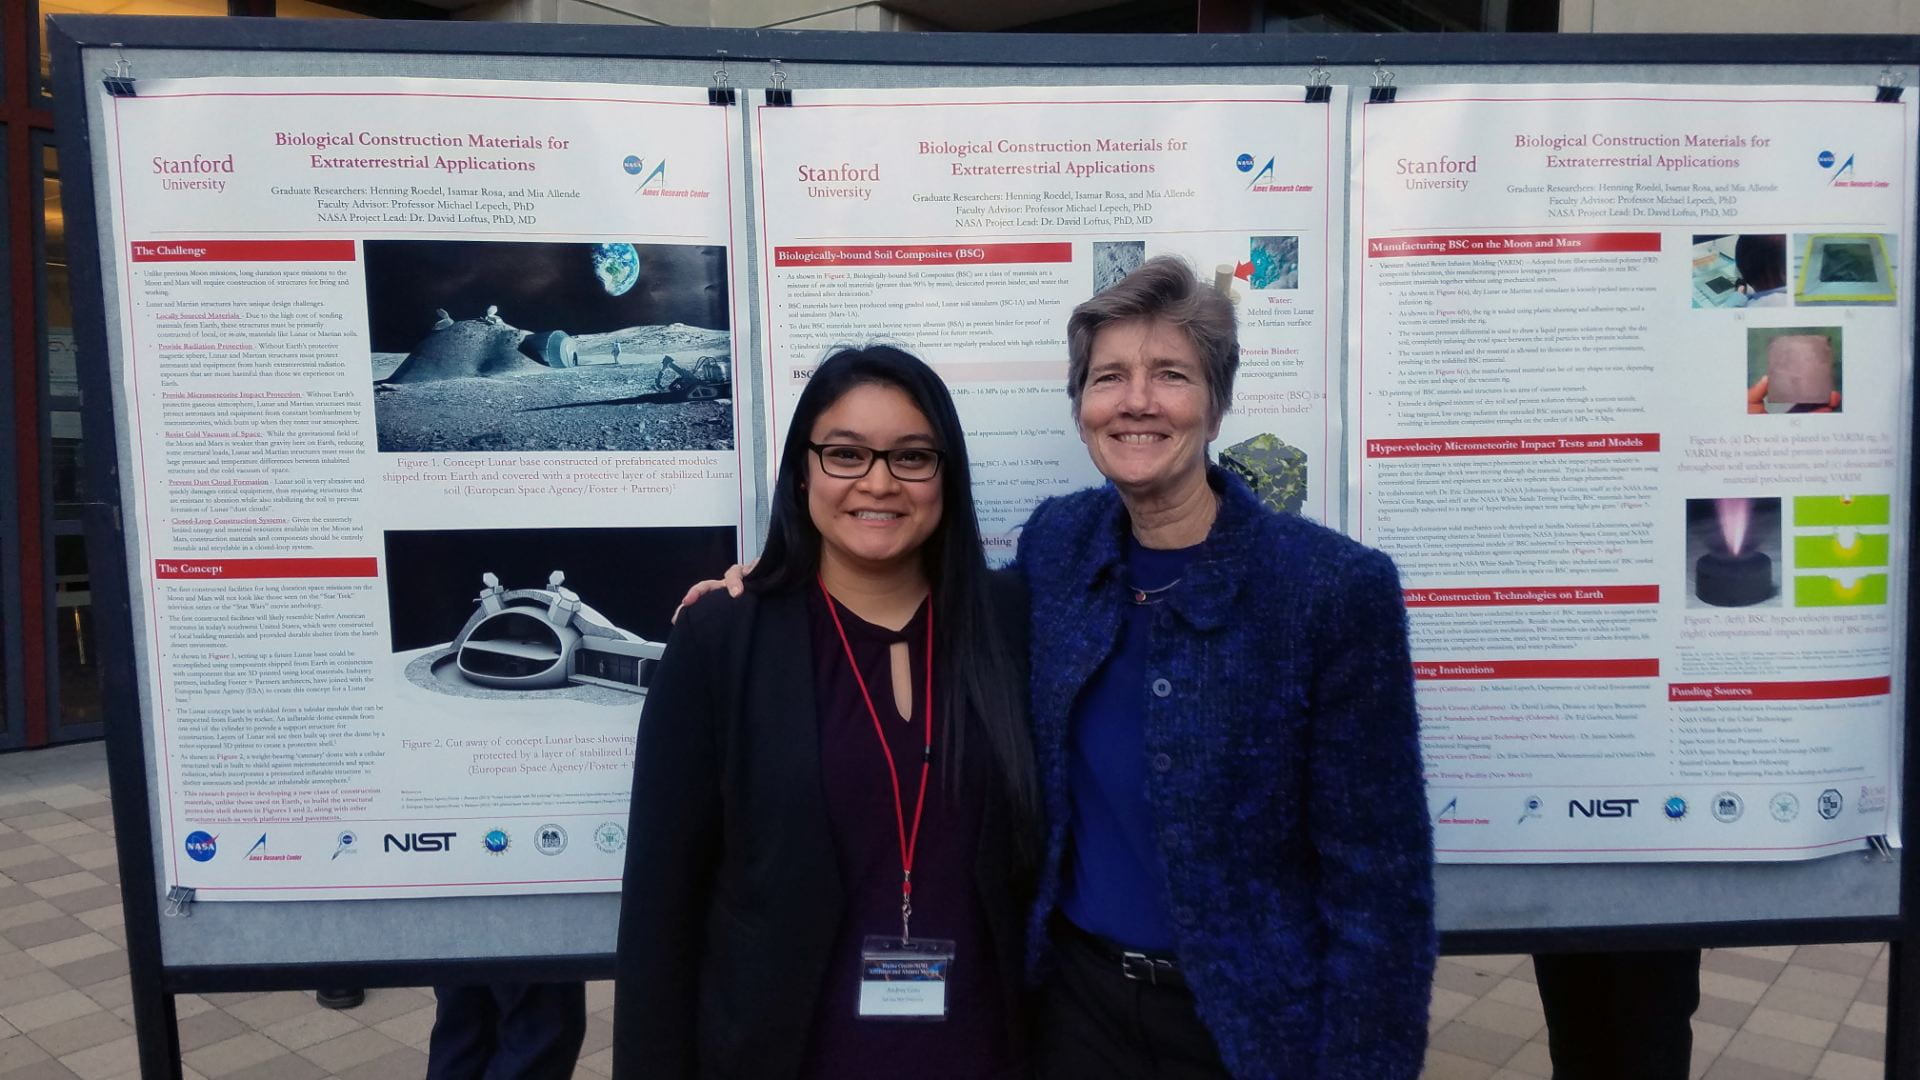 SJSU student Andrea Coto presented work with SJSU AVP for Undergraduate Programs Thalia Anagnos at the Stanford Blume Center/SURI Affiliates/Alumni Meeting in fall 2018. Coto, '19 Civil Engineering, has received a National Science Foundation Graduate Research Fellowship to pursue a graduate degree at Stanford.